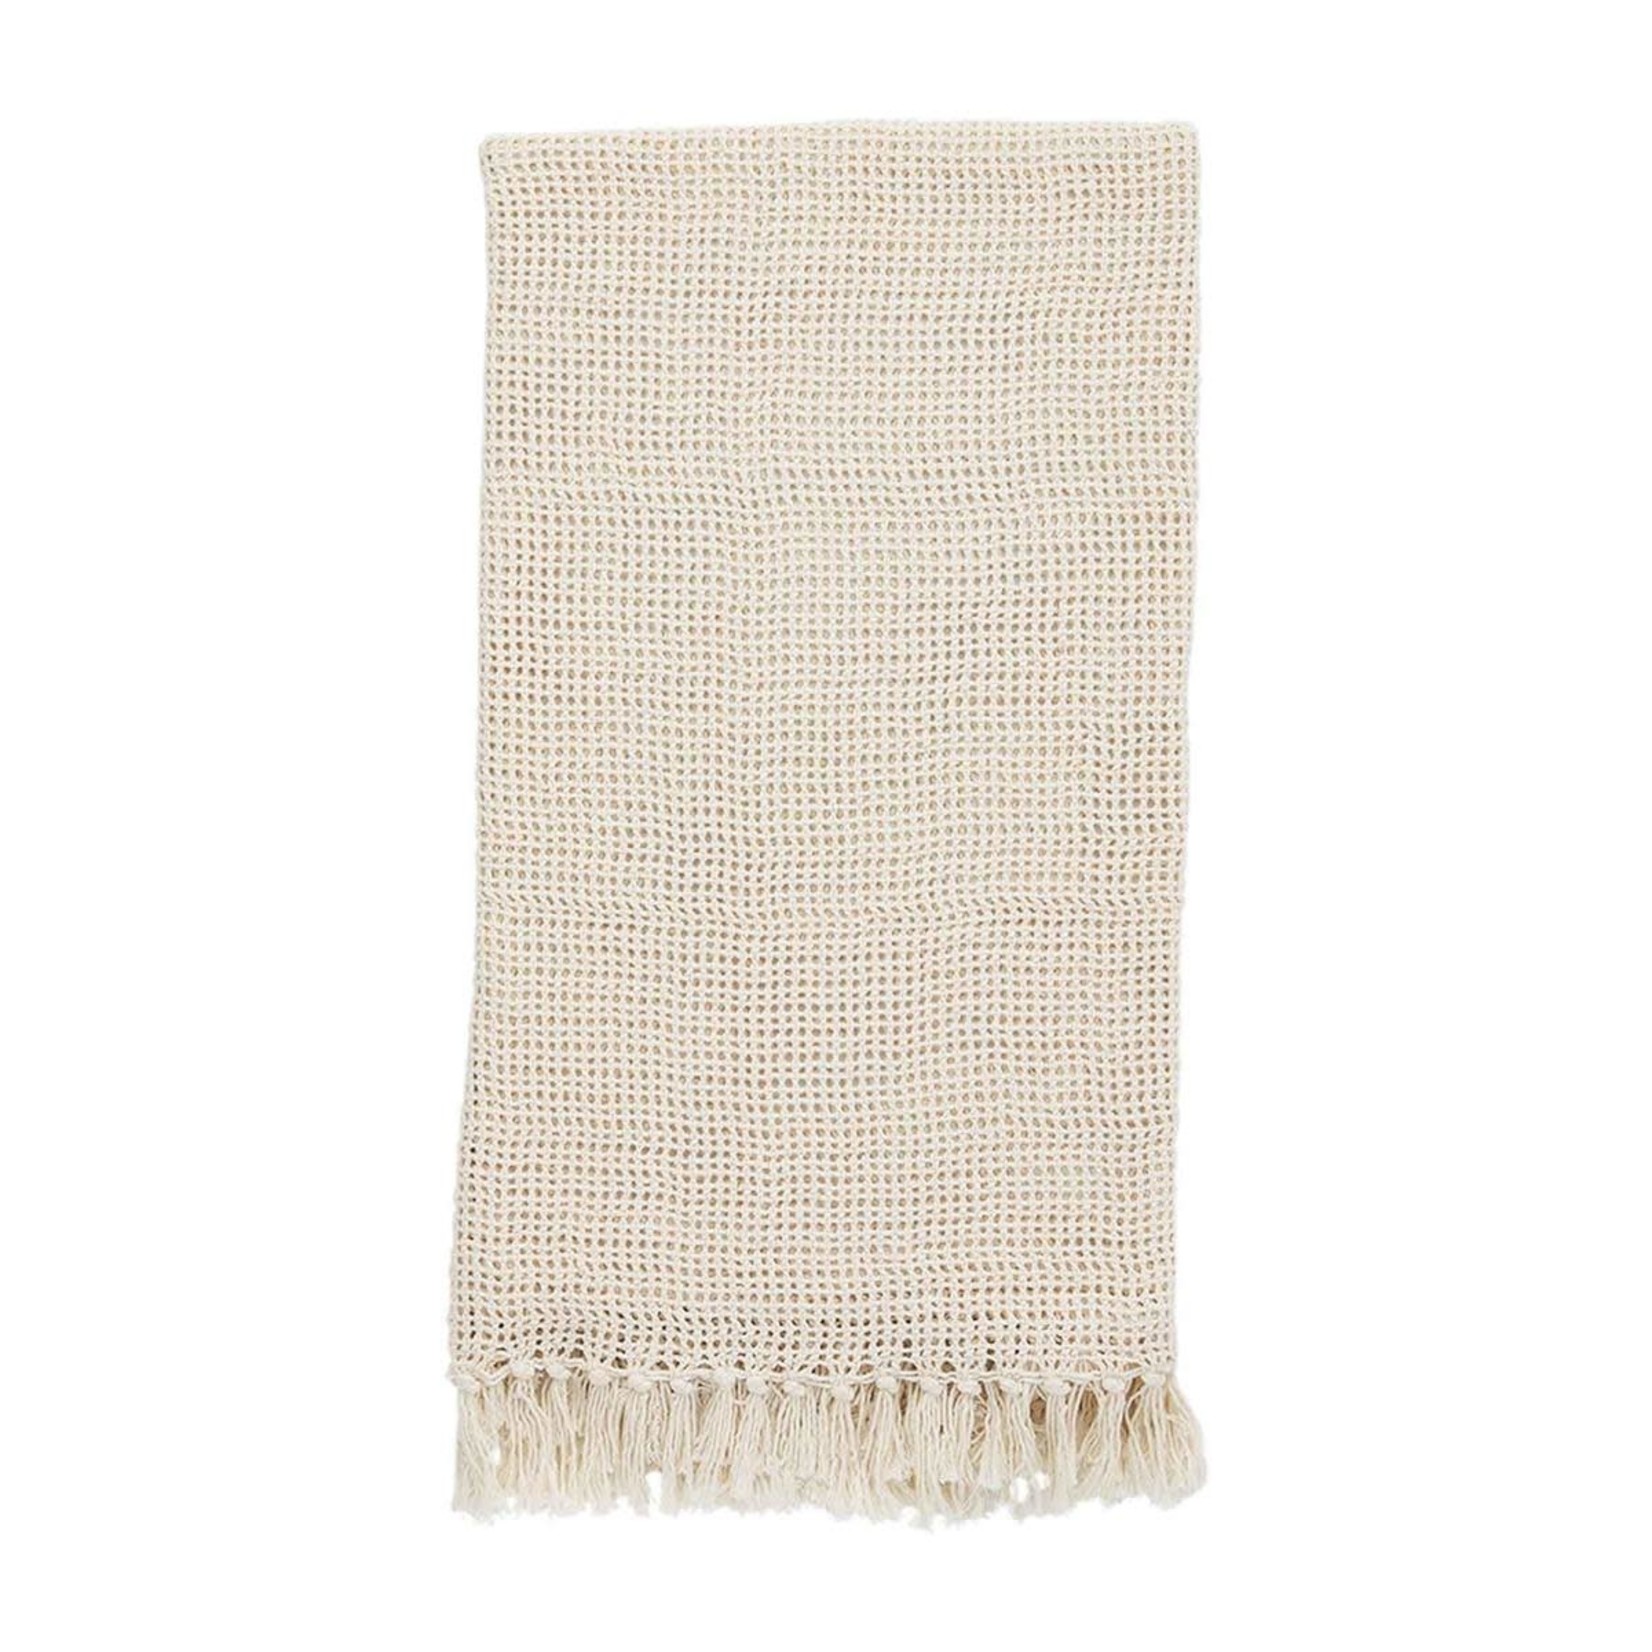 Cream Knitted Throw Blanket